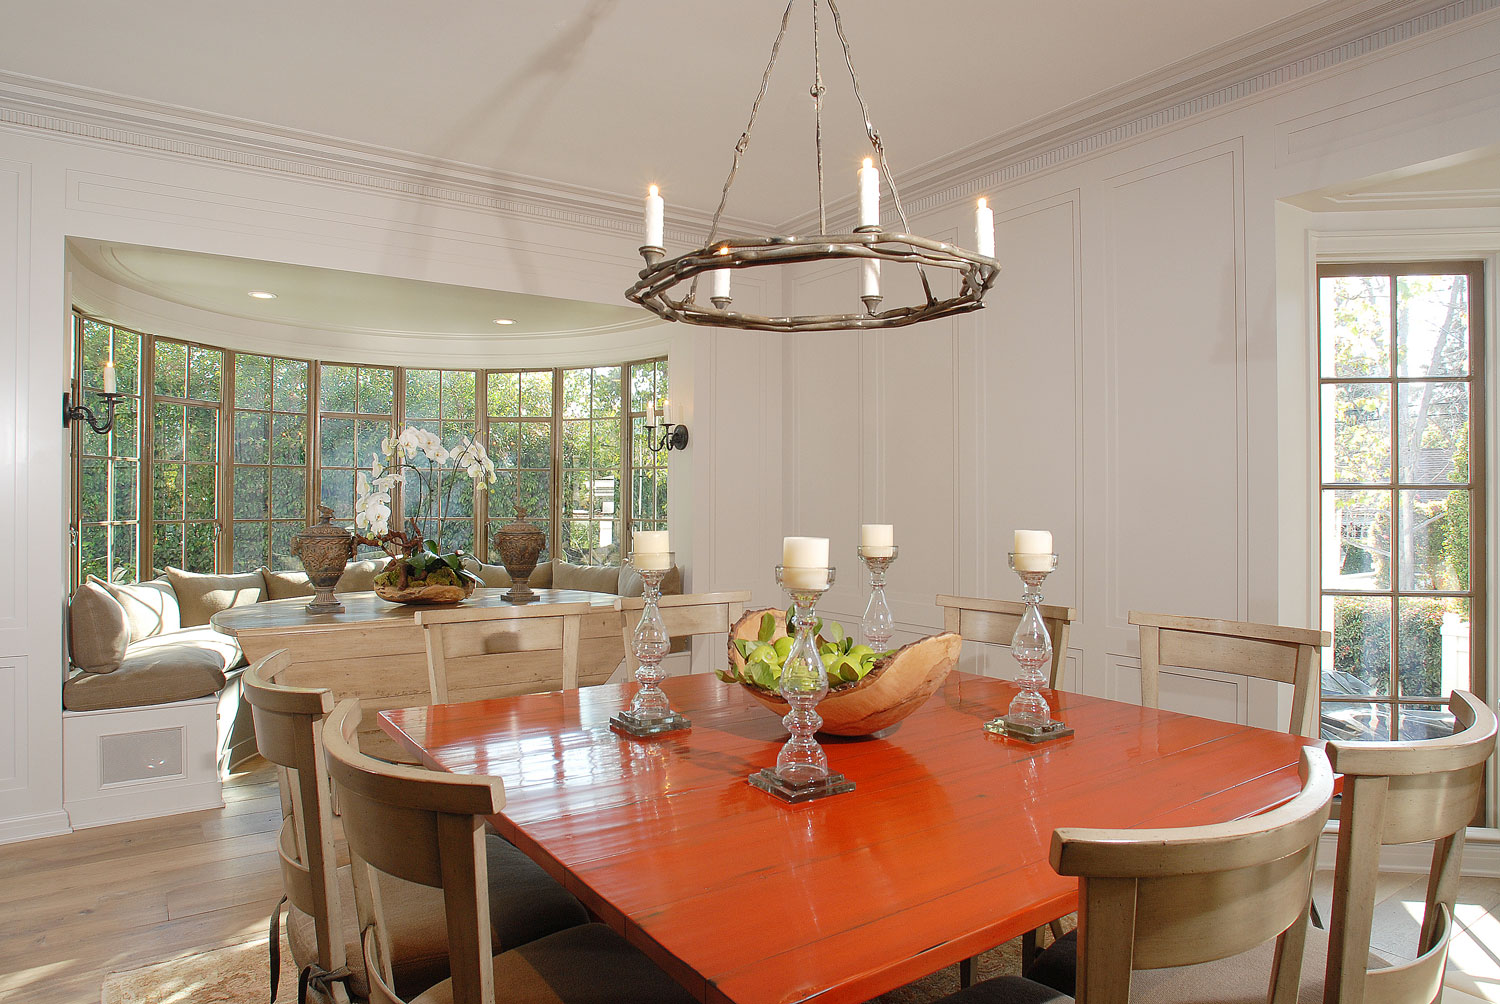 02-traditional-dining-room-paneled-walls-curved-window-seat-gary-drake-general-contractor.jpg